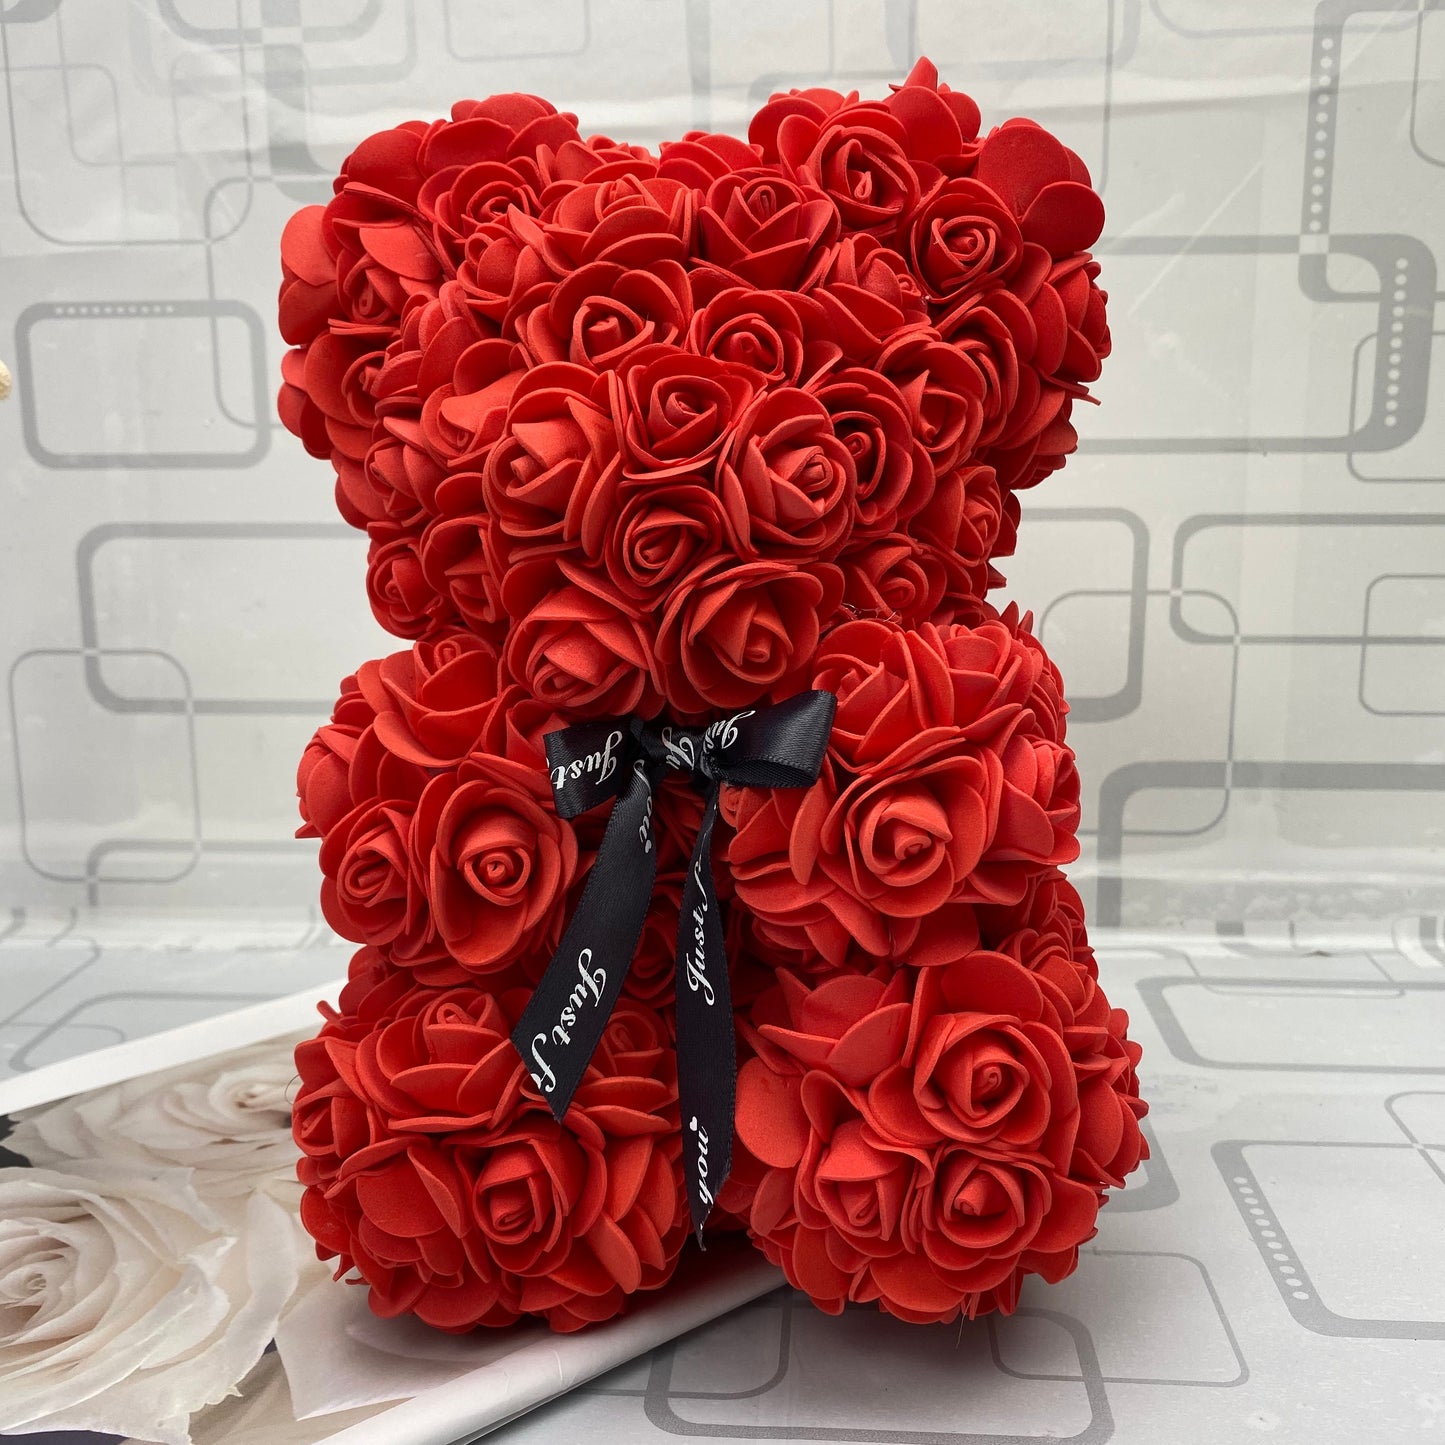 Valentines Day Gift 25cm Red Rose Teddy Bear